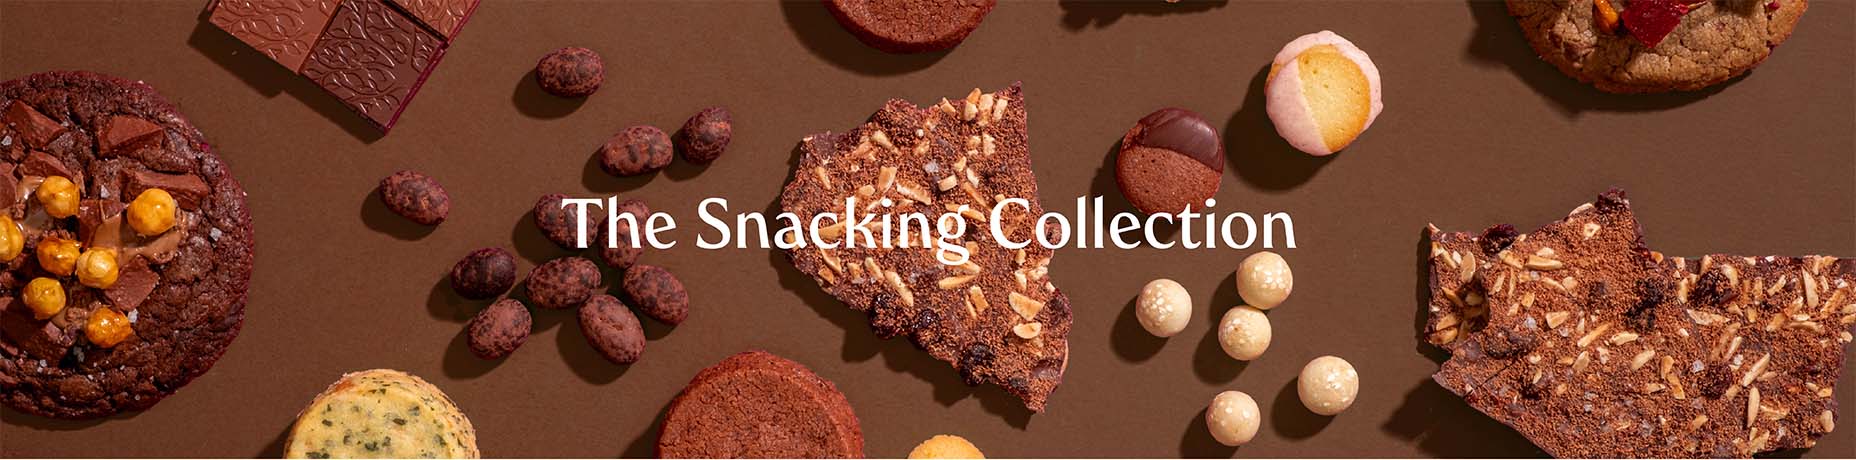 The Snacking Collection